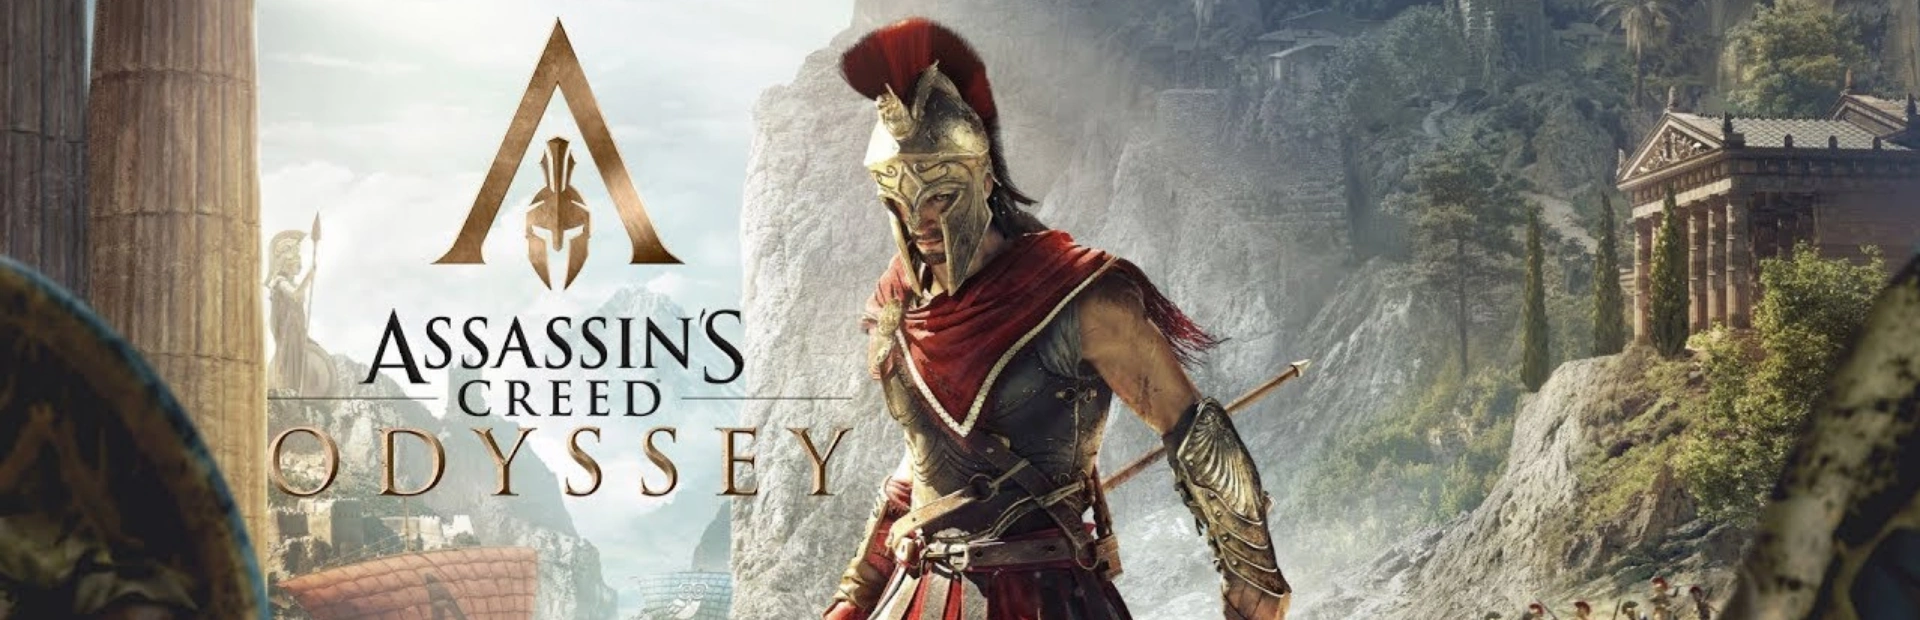 Assassins Creed Odyssey the fate of atlantis.banner3